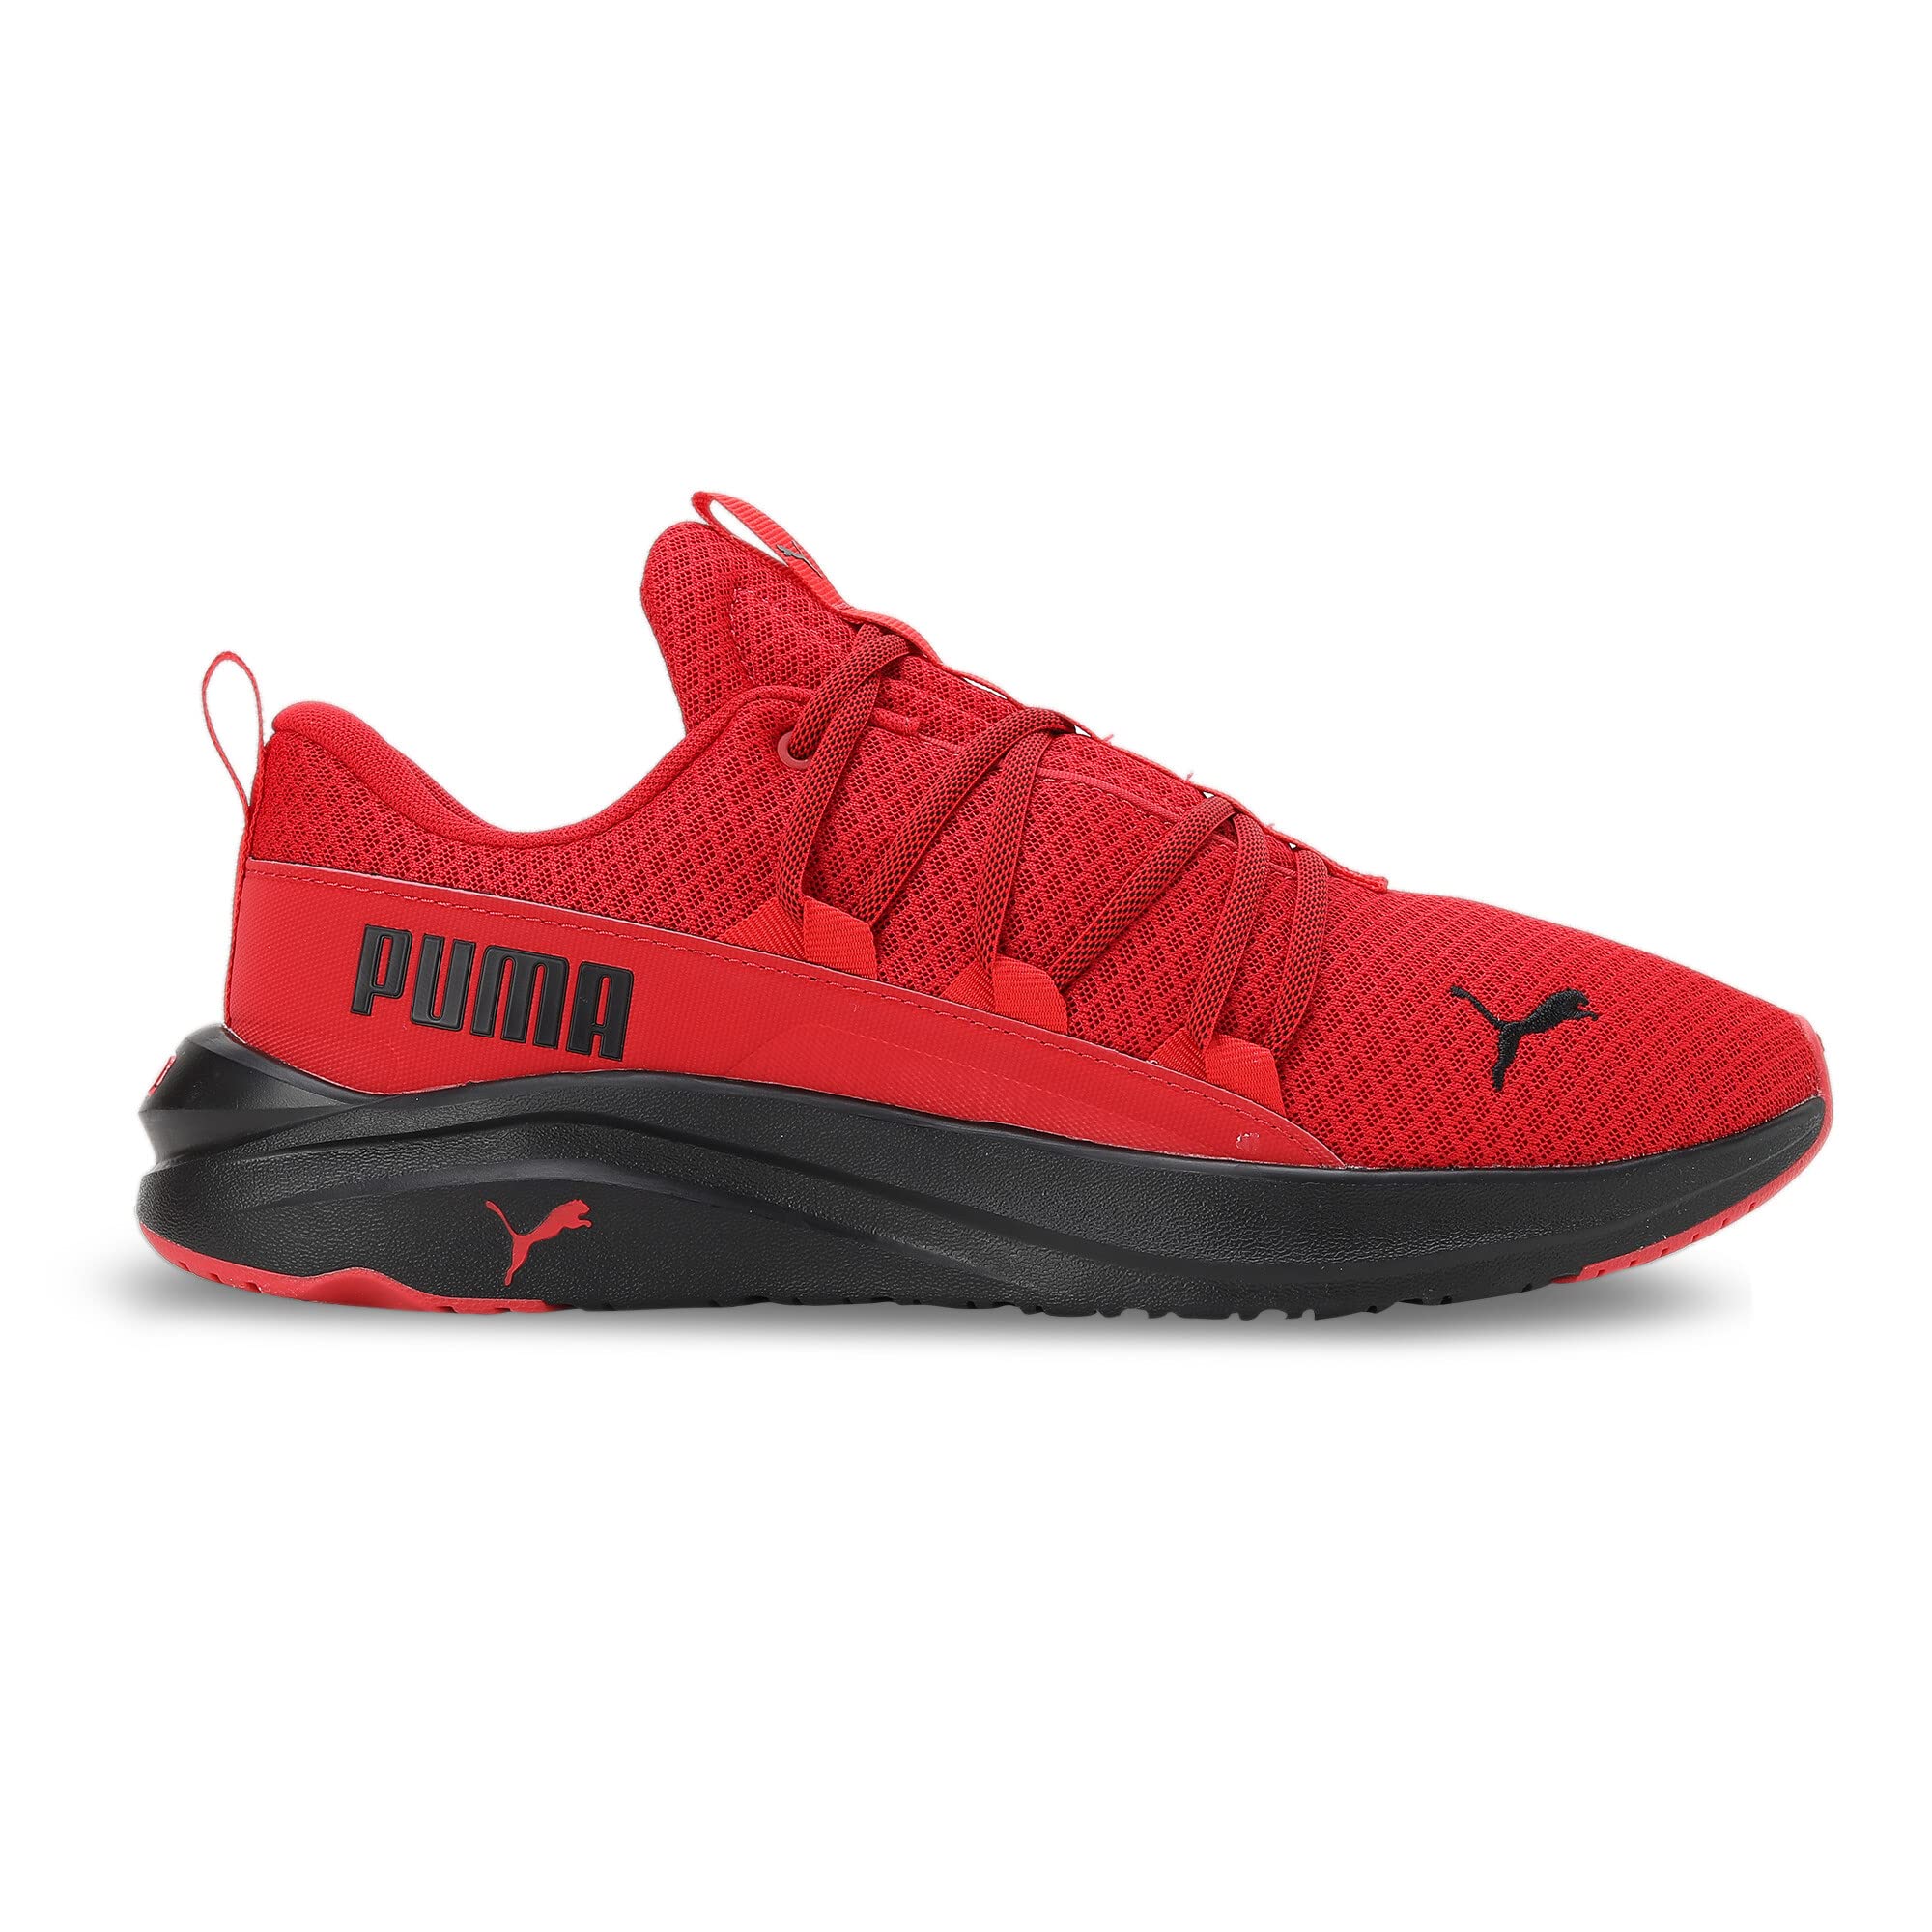 PUMA Women's SOFTRIDE One4All Sneaker, High Risk Red Black, 8.5